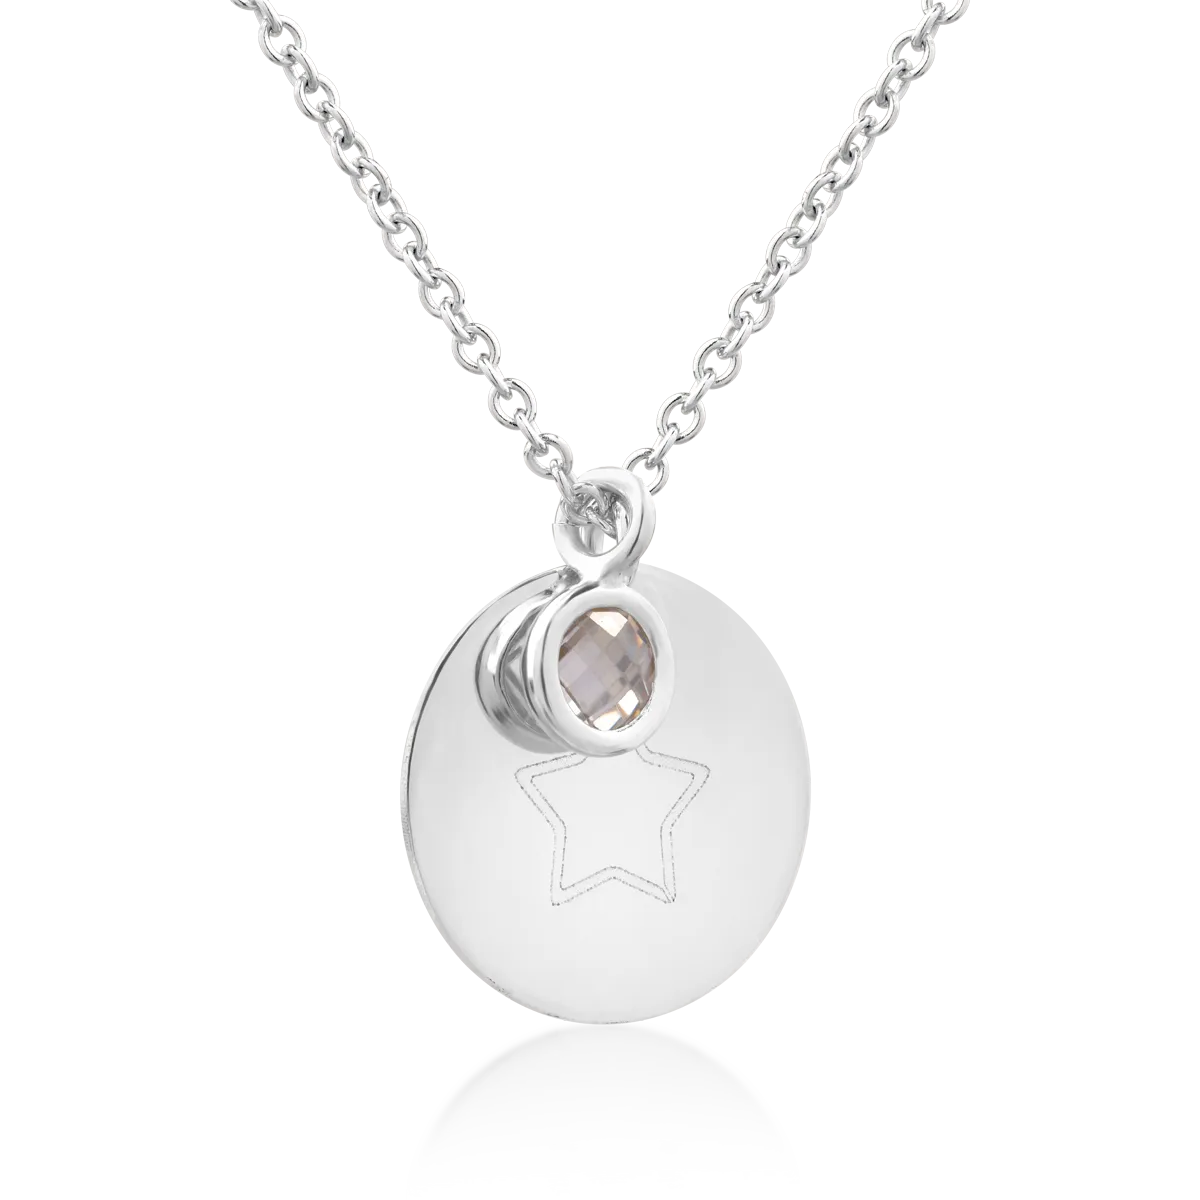 14K white gold penny pendant and charm necklace